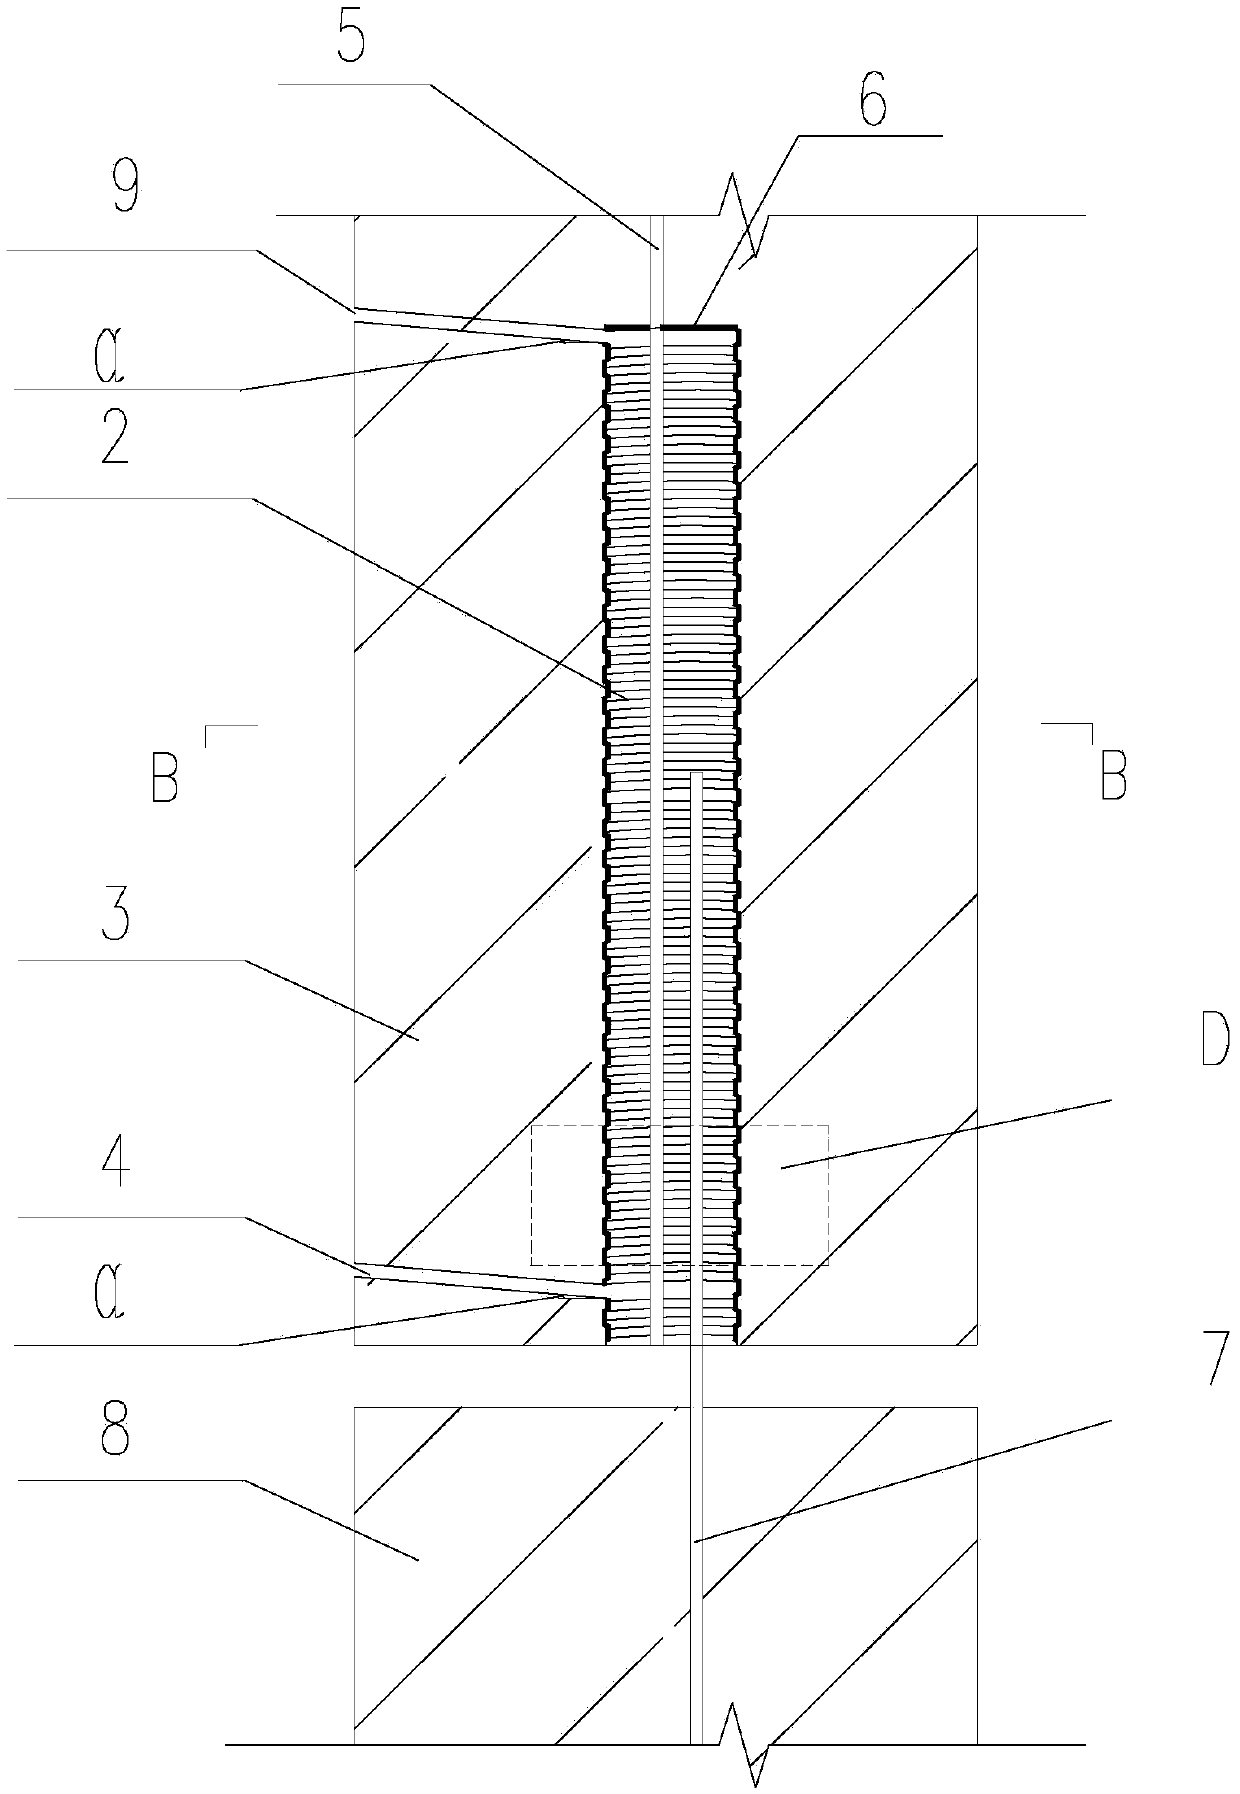 Steel bar lap joint structure containing FRP constraint ring